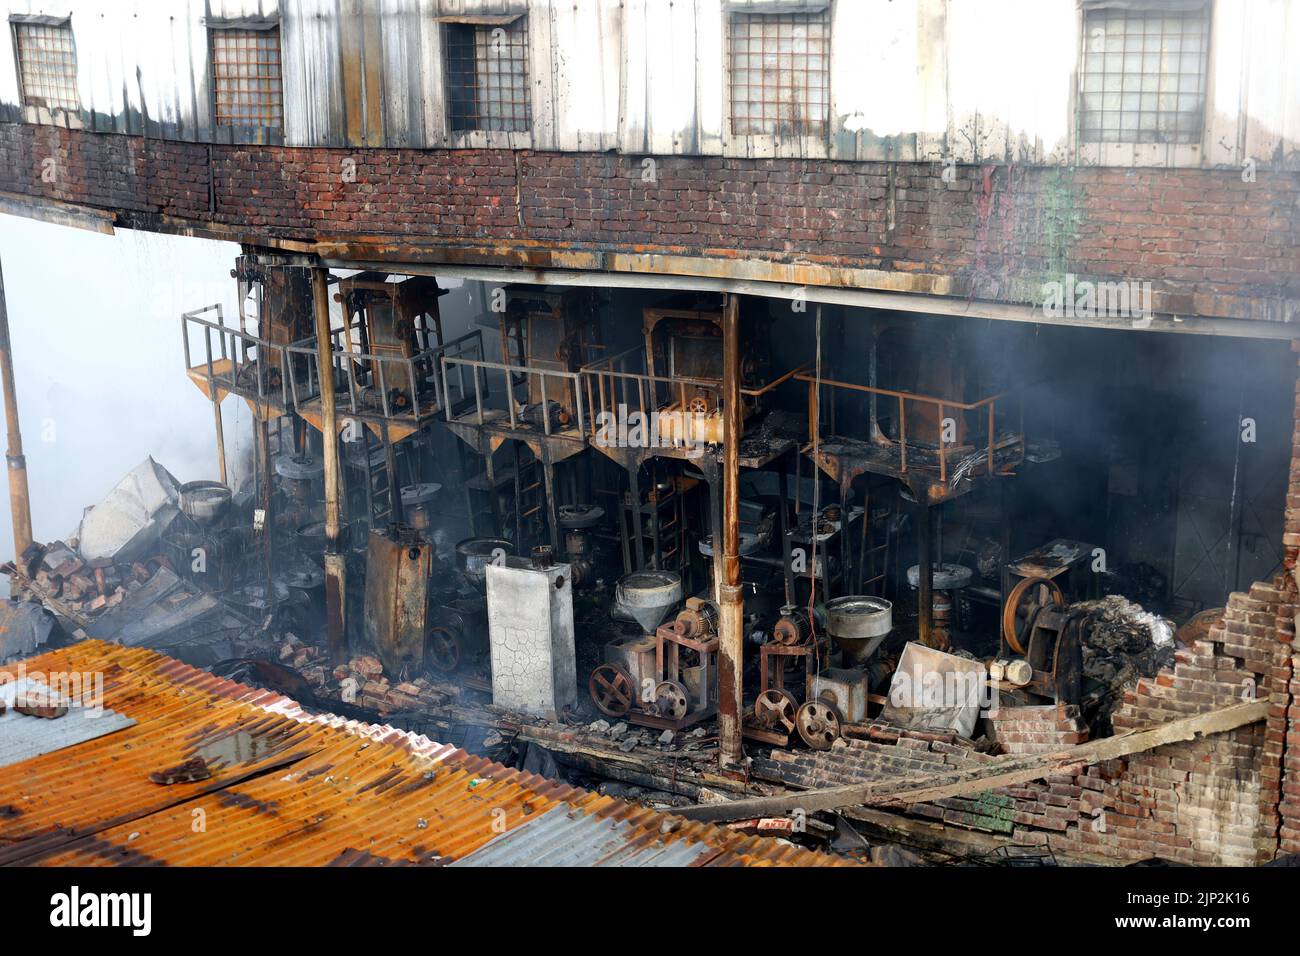 Old Dhaka, Dhaka, Bangladesh. 15th Aug, 2022. At least 6 workers died in a  fire in a plastic toy factory in Robidasghat area of Old Dhaka. The fire  originated from the explosion